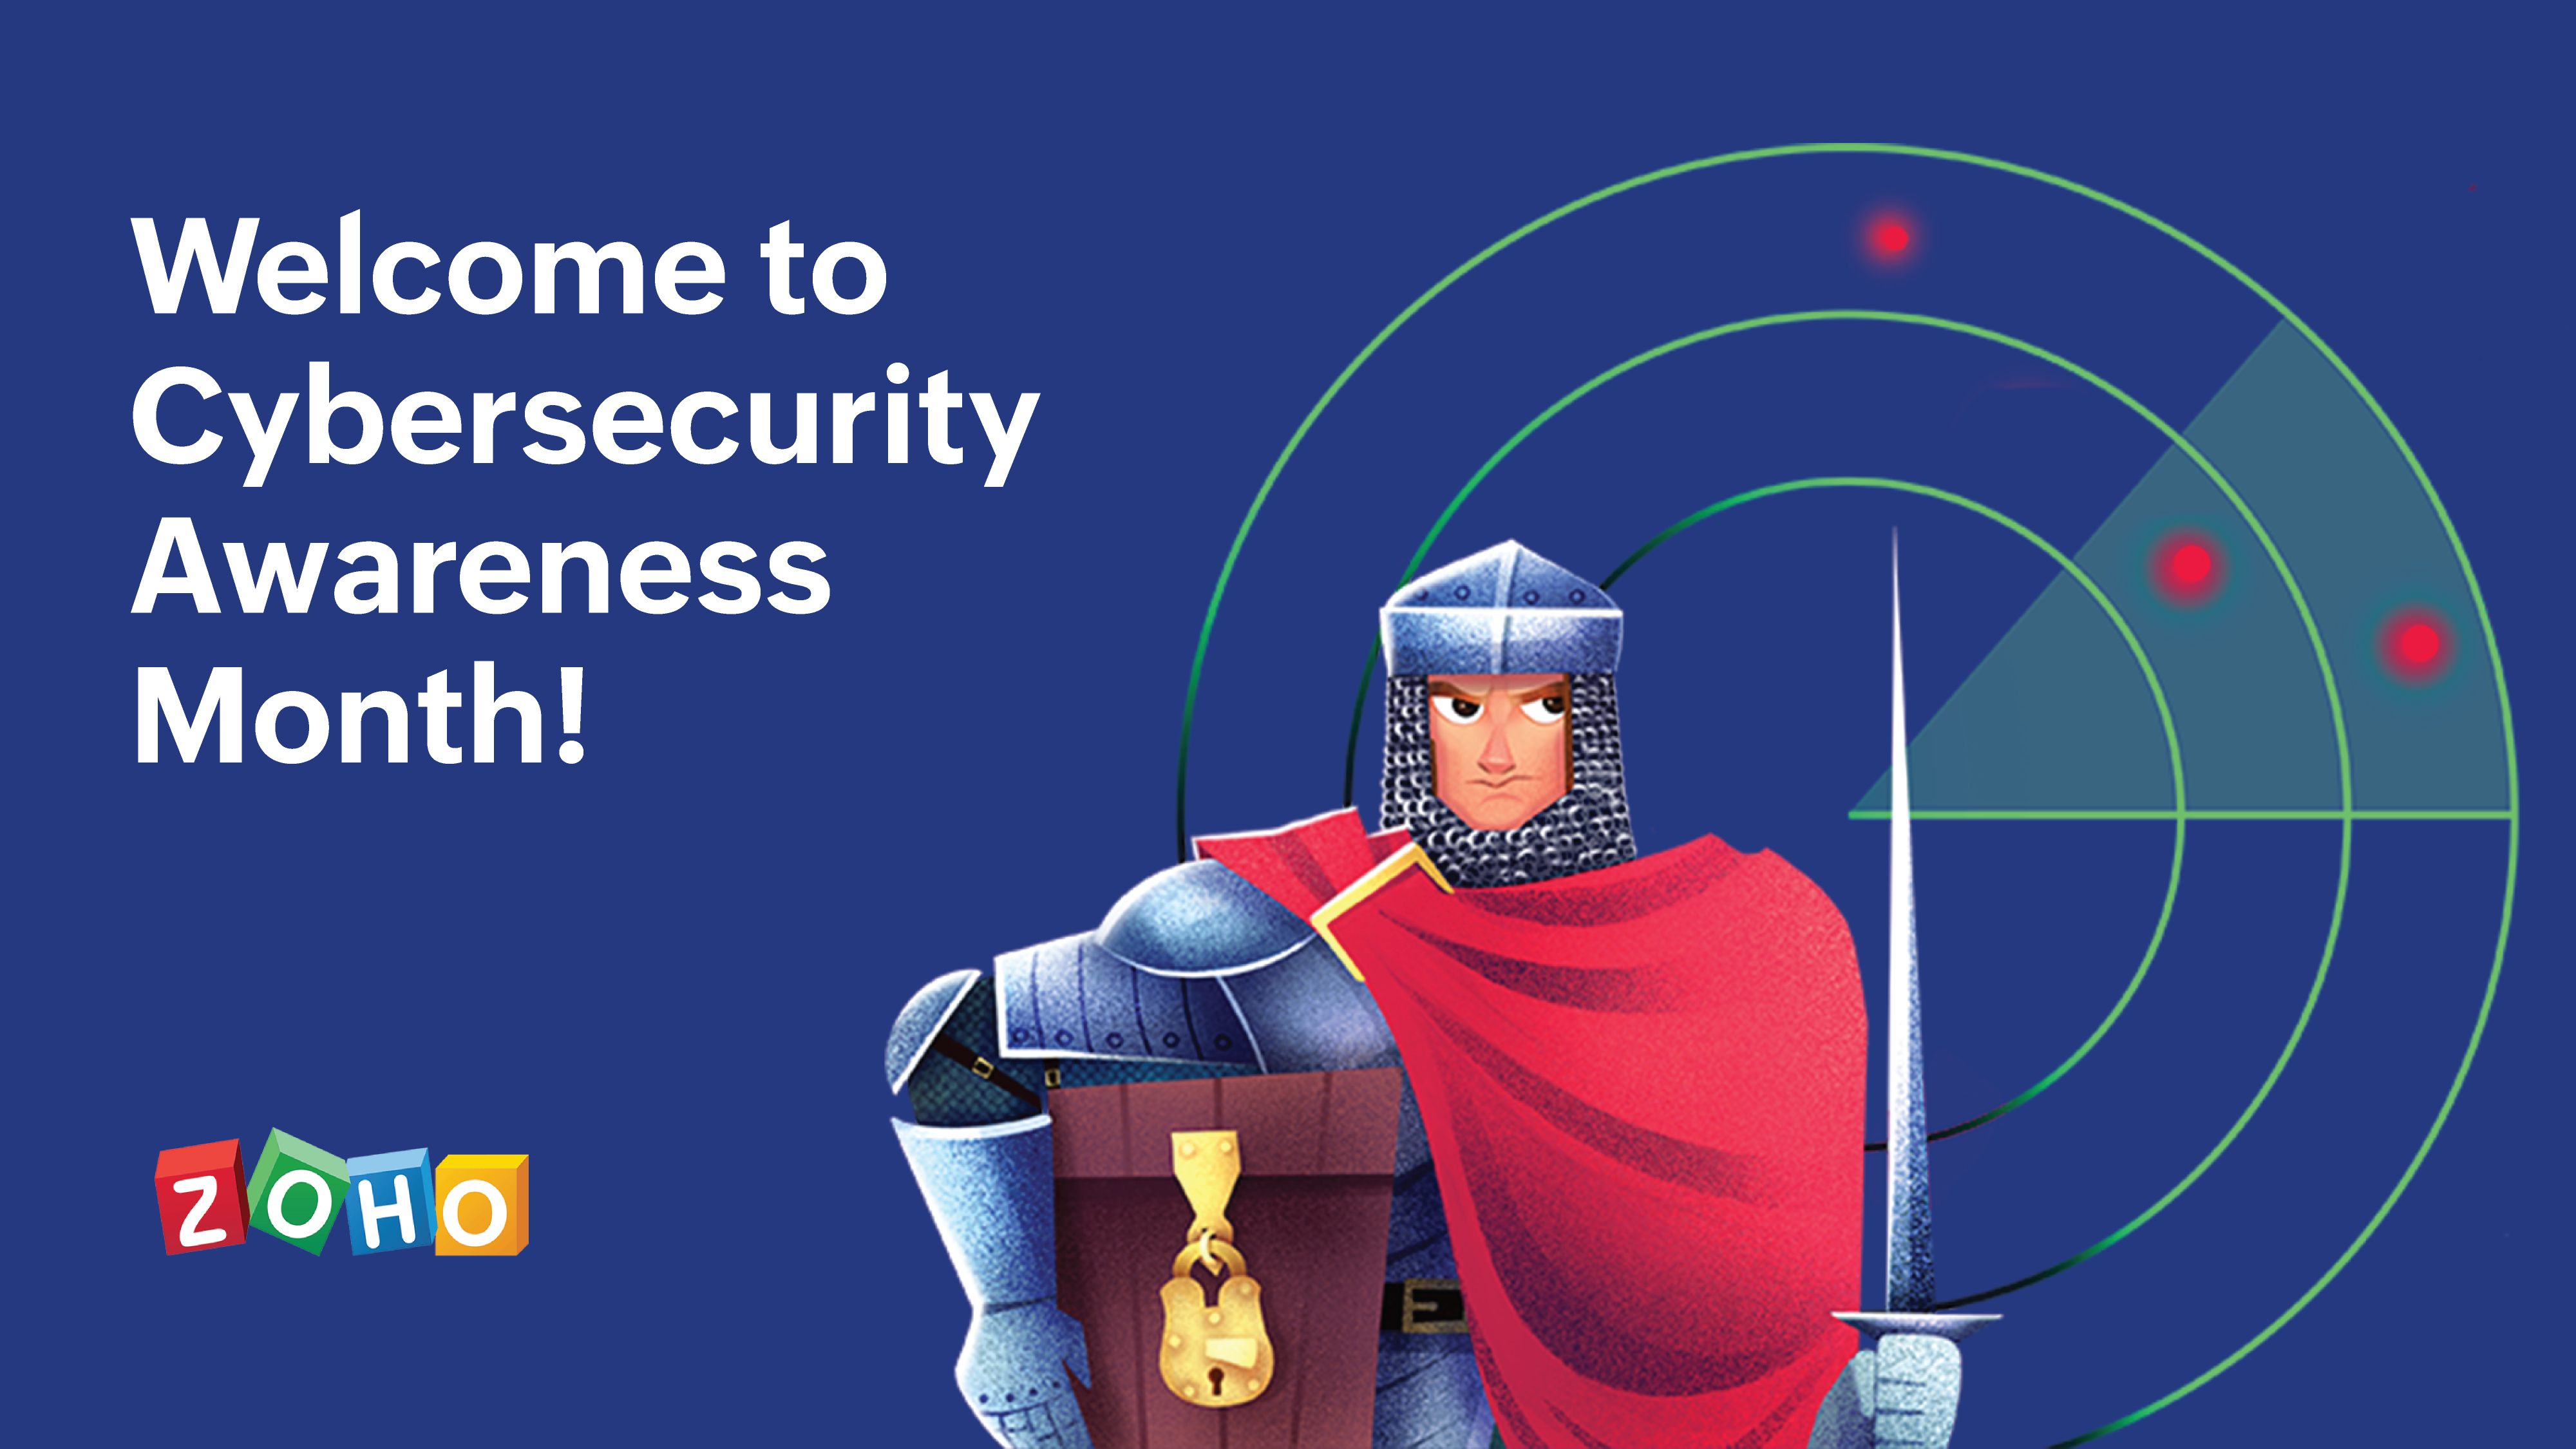 Secure your content with Password Protection - Zoho Blog